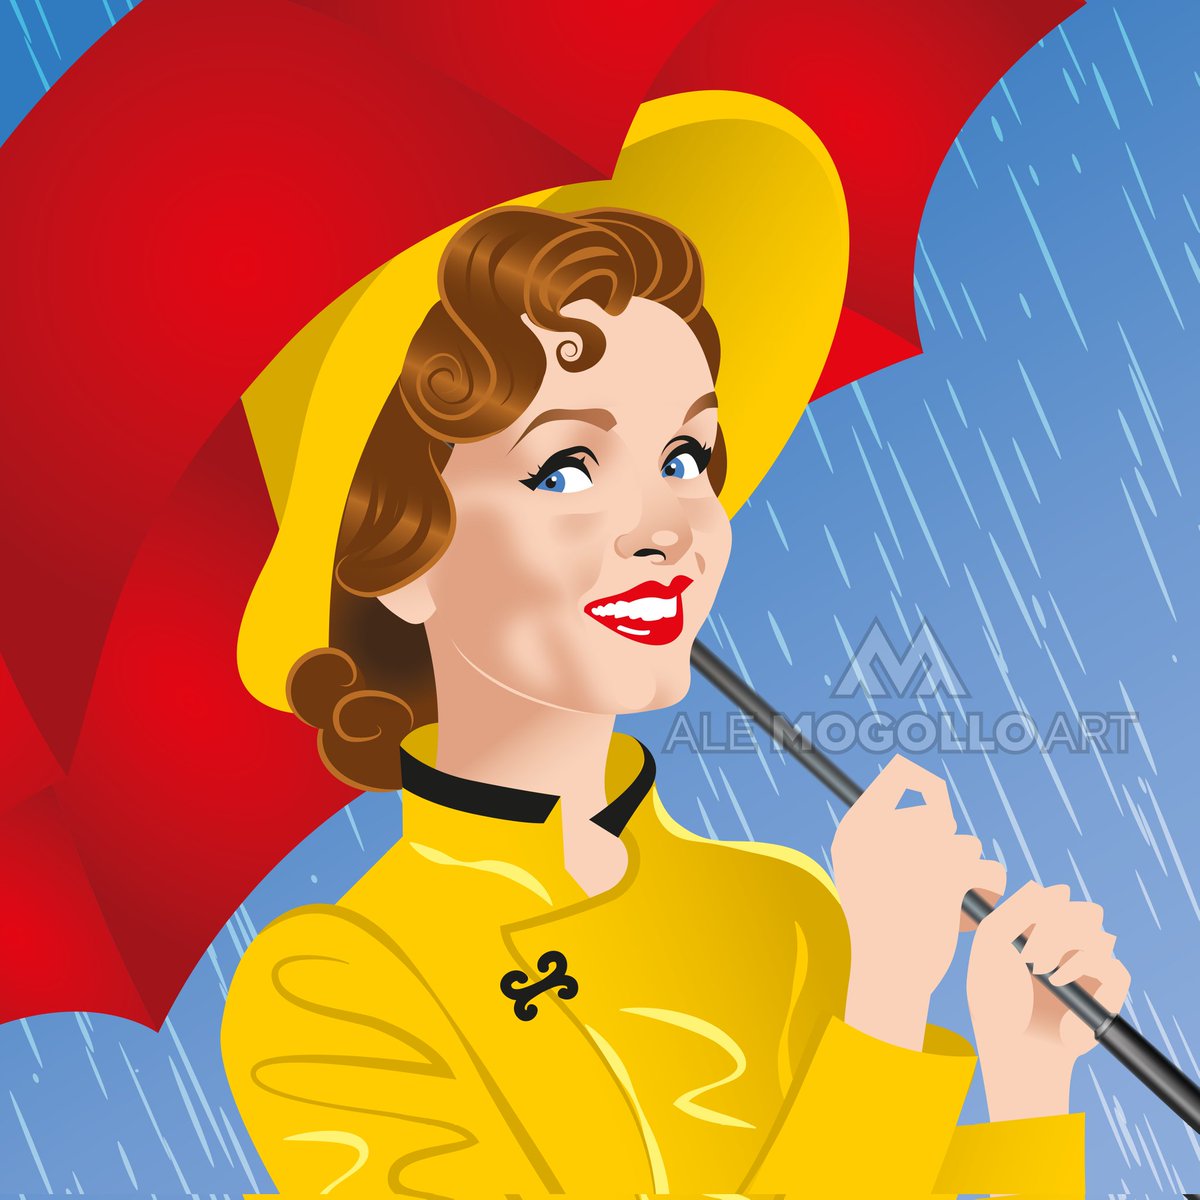 Welcome April, remembering the lovely Debbie Reynolds on her birthday. Unforgettable as Kathy in Singing in the rain. Are you a fan?
#debbiereynolds #singingintherain #genekelly #april #musical #rain #umbrella #oldhollywood #classicfilms #alejandromogolloart